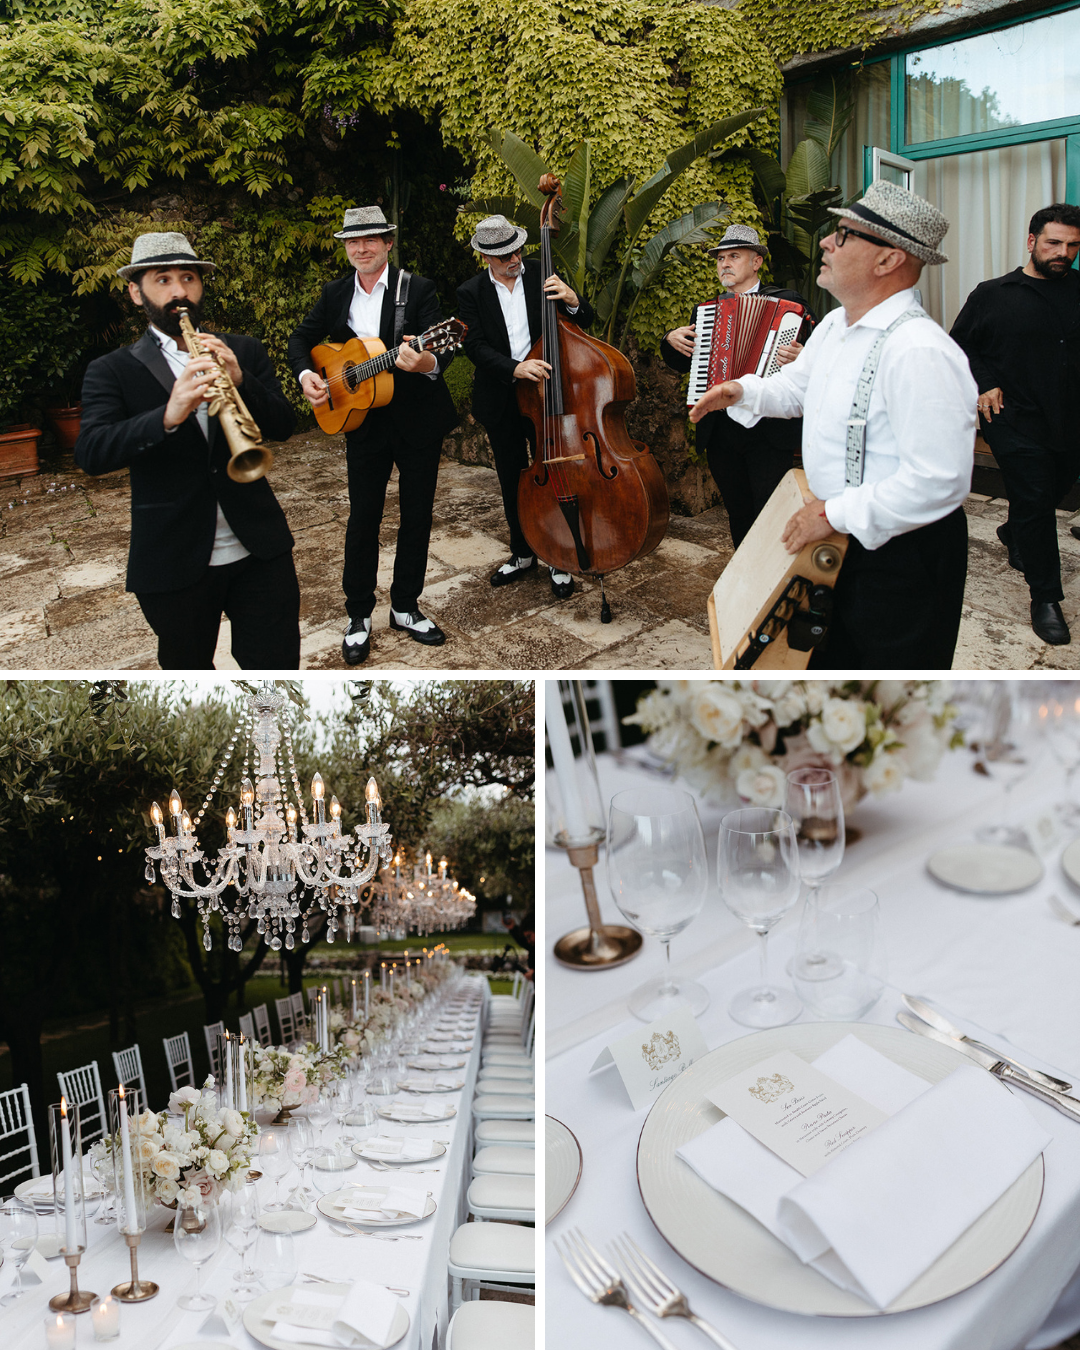 Collage of photos from Italian wedding. Band of musicians play at wedding reception and dinner.